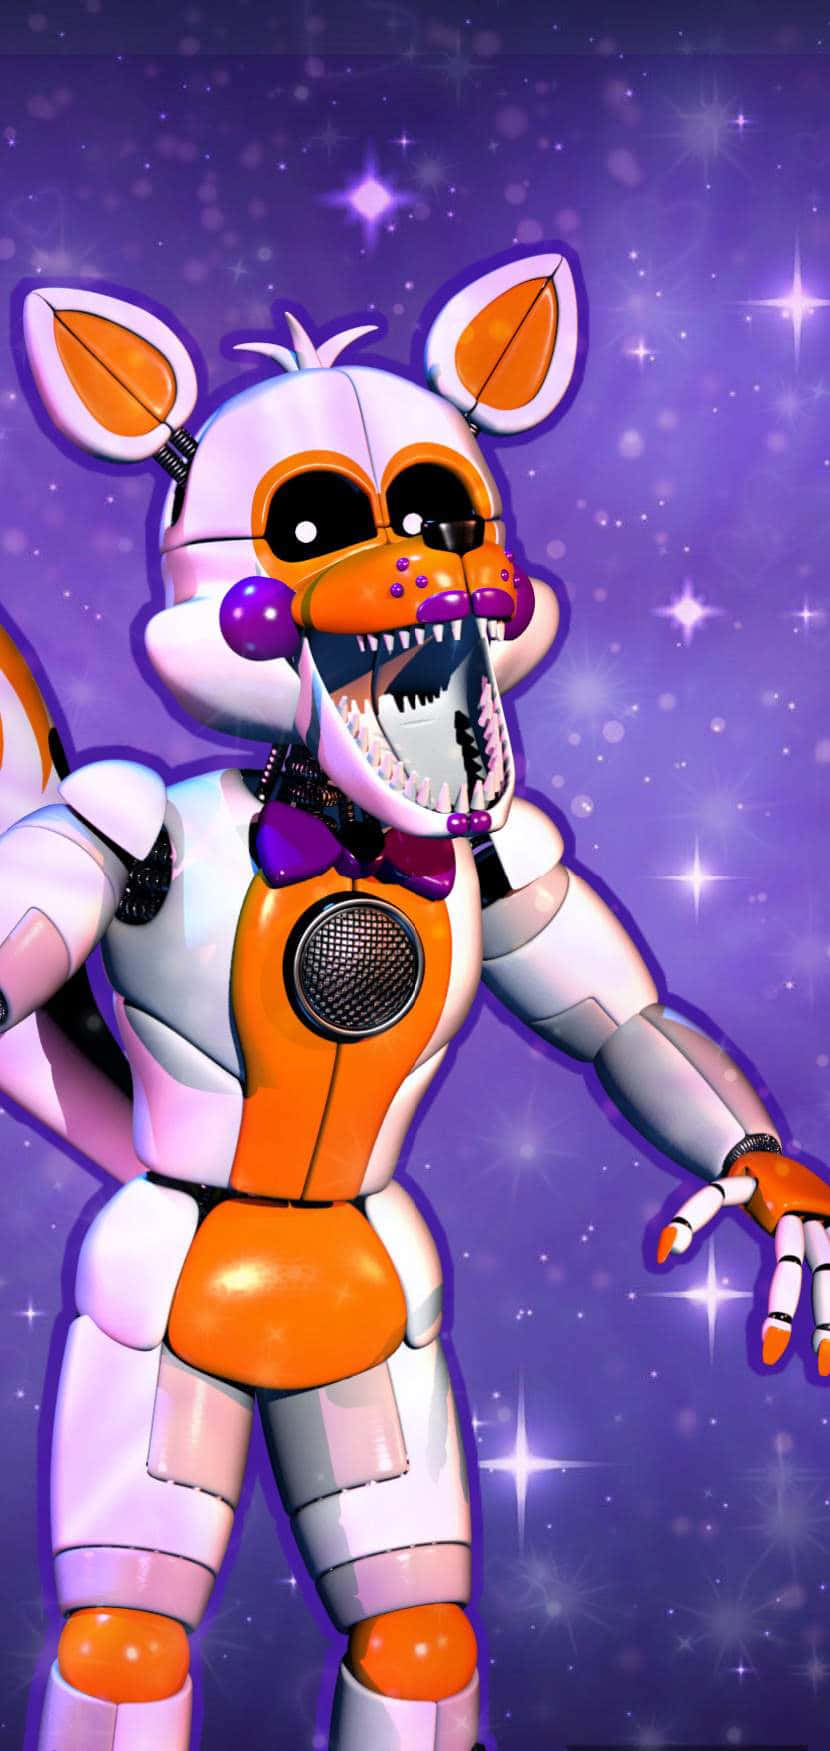 Get ready to explore the magical and comical world of Lolbit! Wallpaper